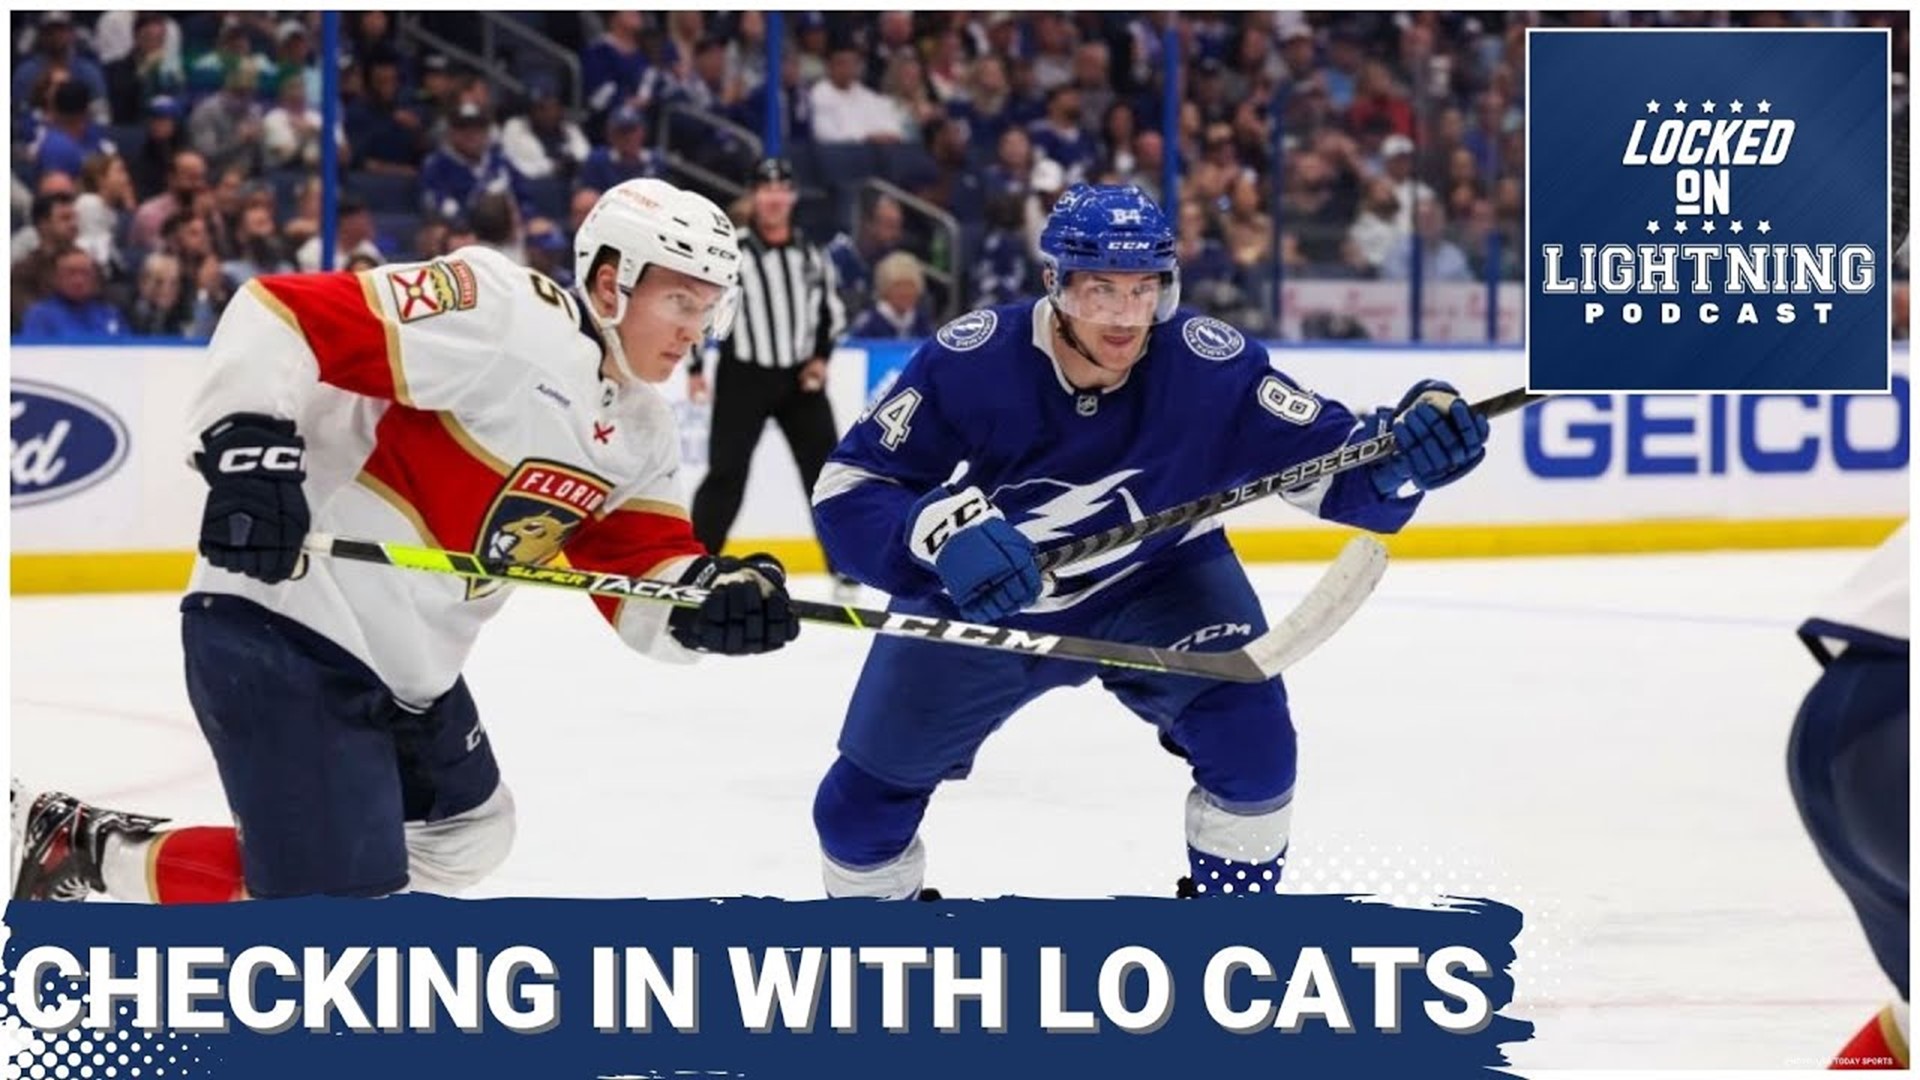 On today's episode, we check in with our divisional foes. The Florida Panthers shocked the hockey world last year with a trip to the Stanley Cup Final.